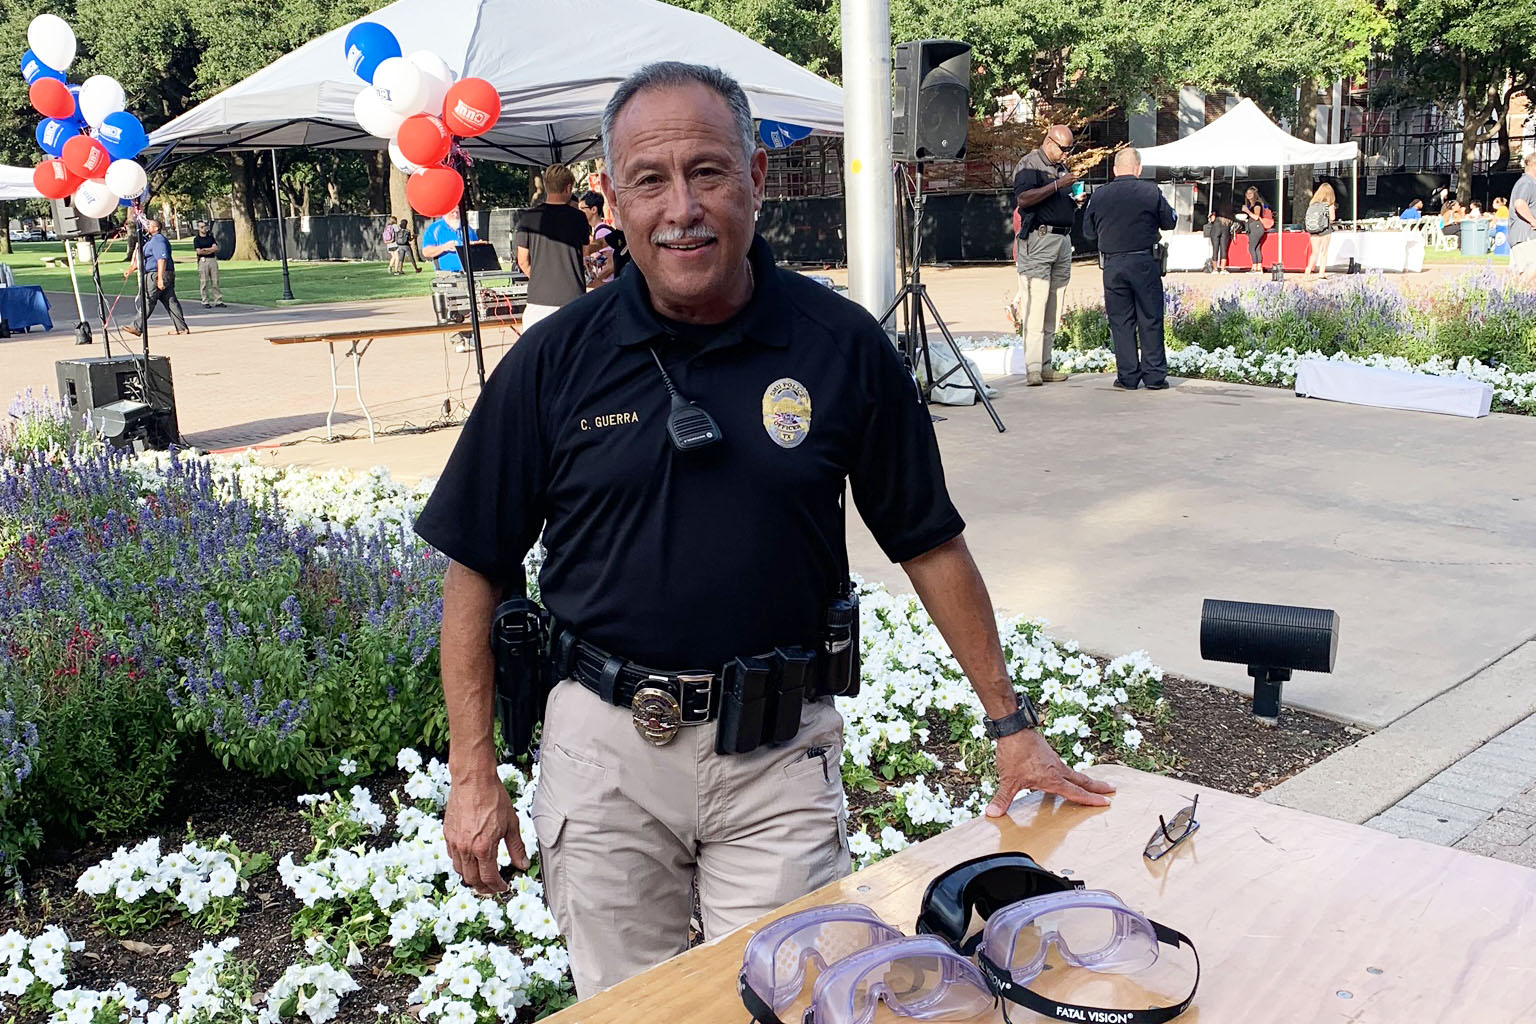 SMU police officer at community event on the main quad